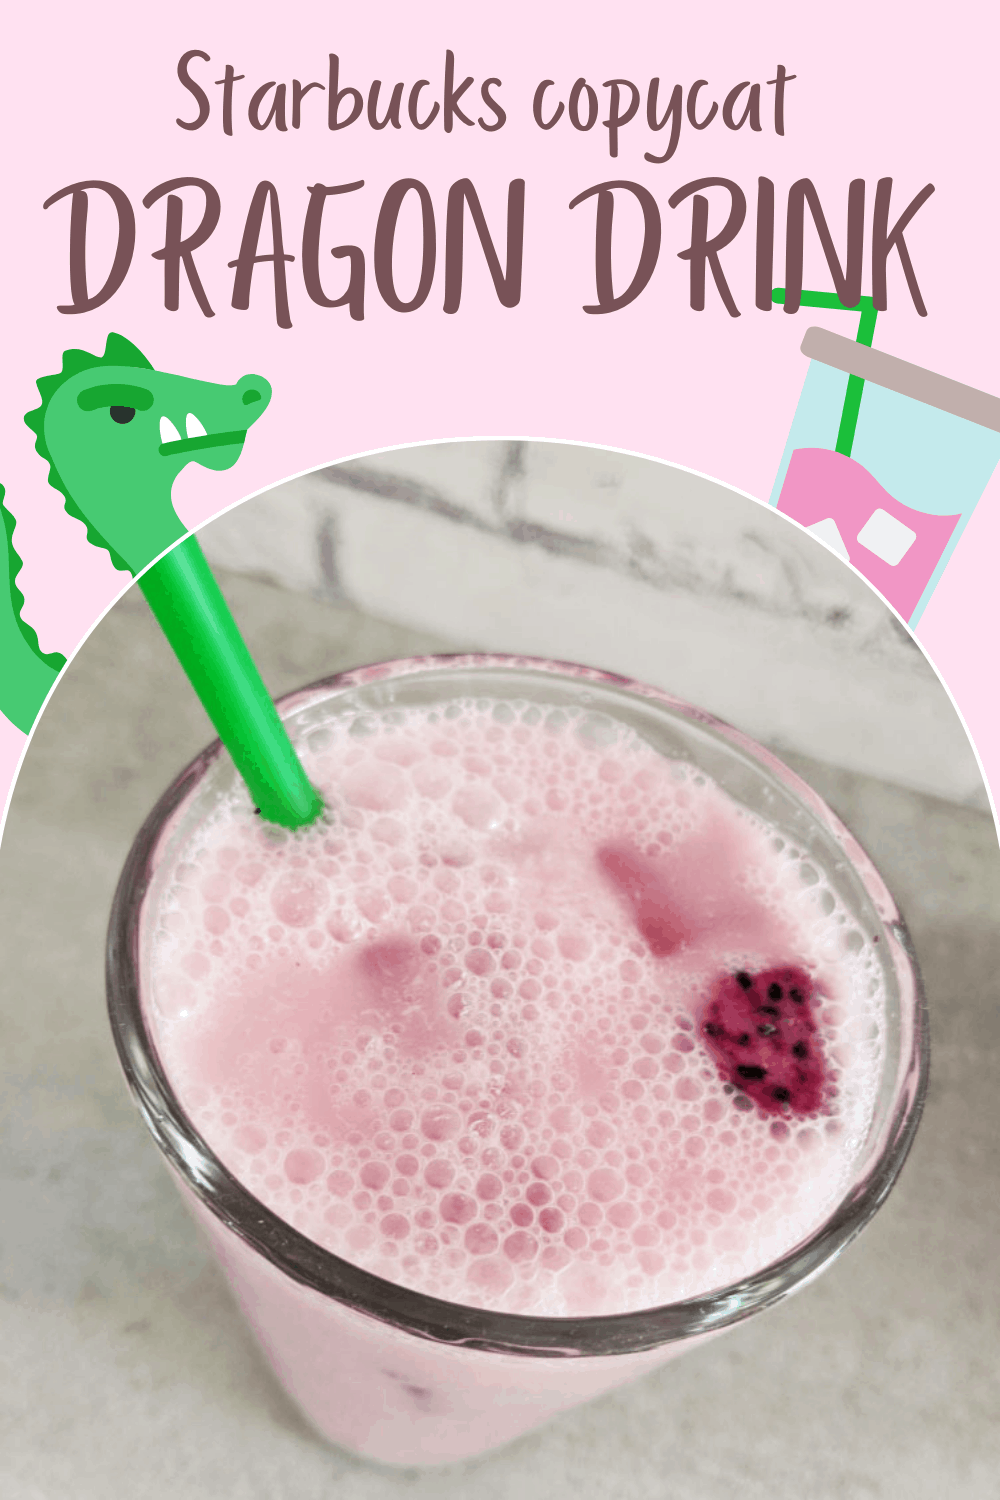 Starbucks Dragon Drink Recipe copycat  Beauty and the Beets